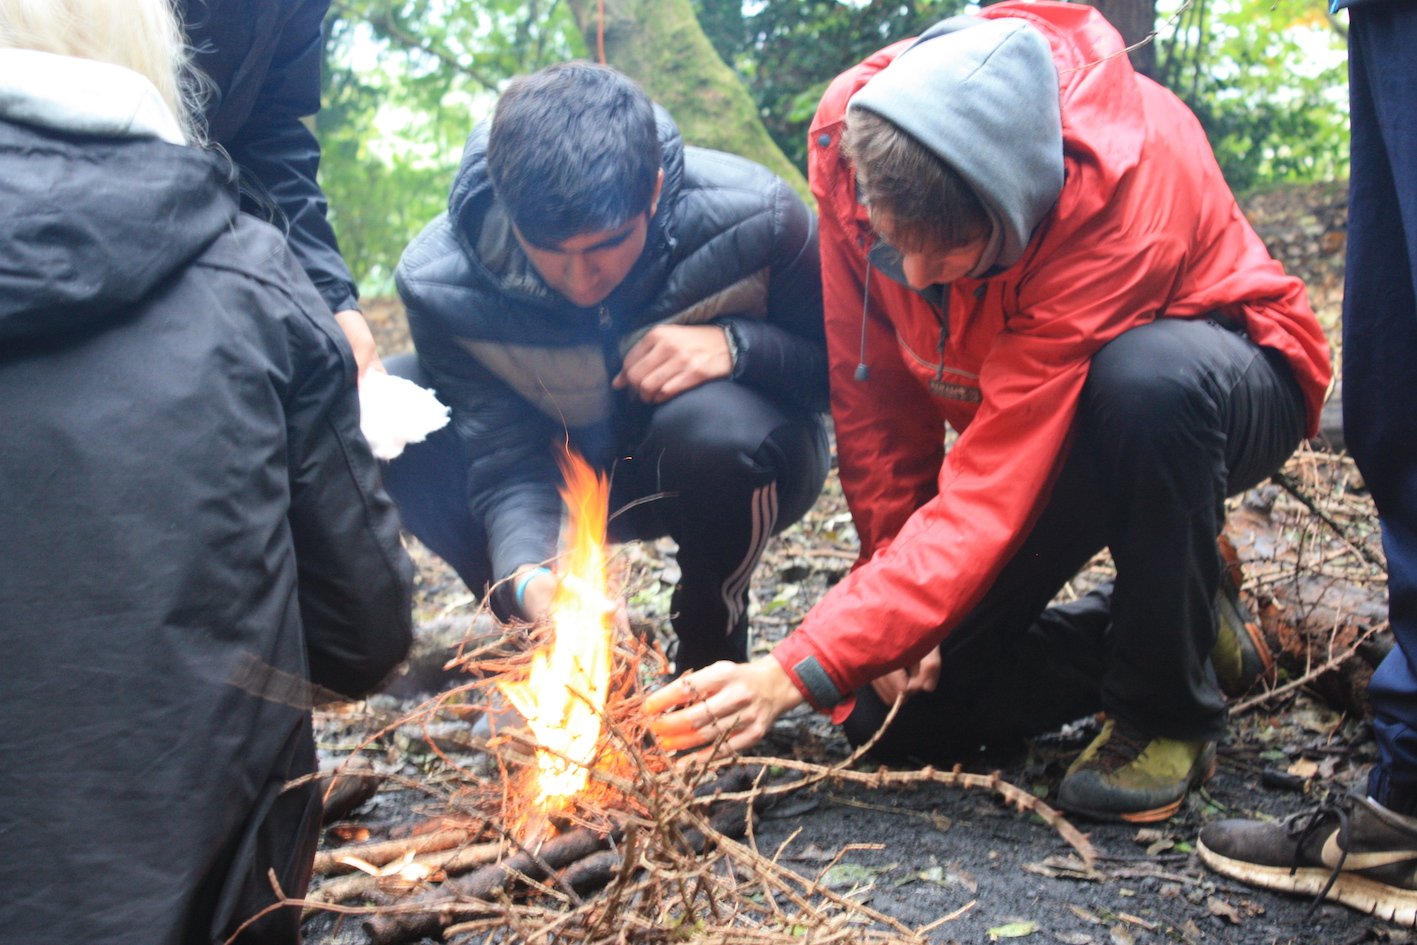 Learn fire lighting, cooking and shelter building skills